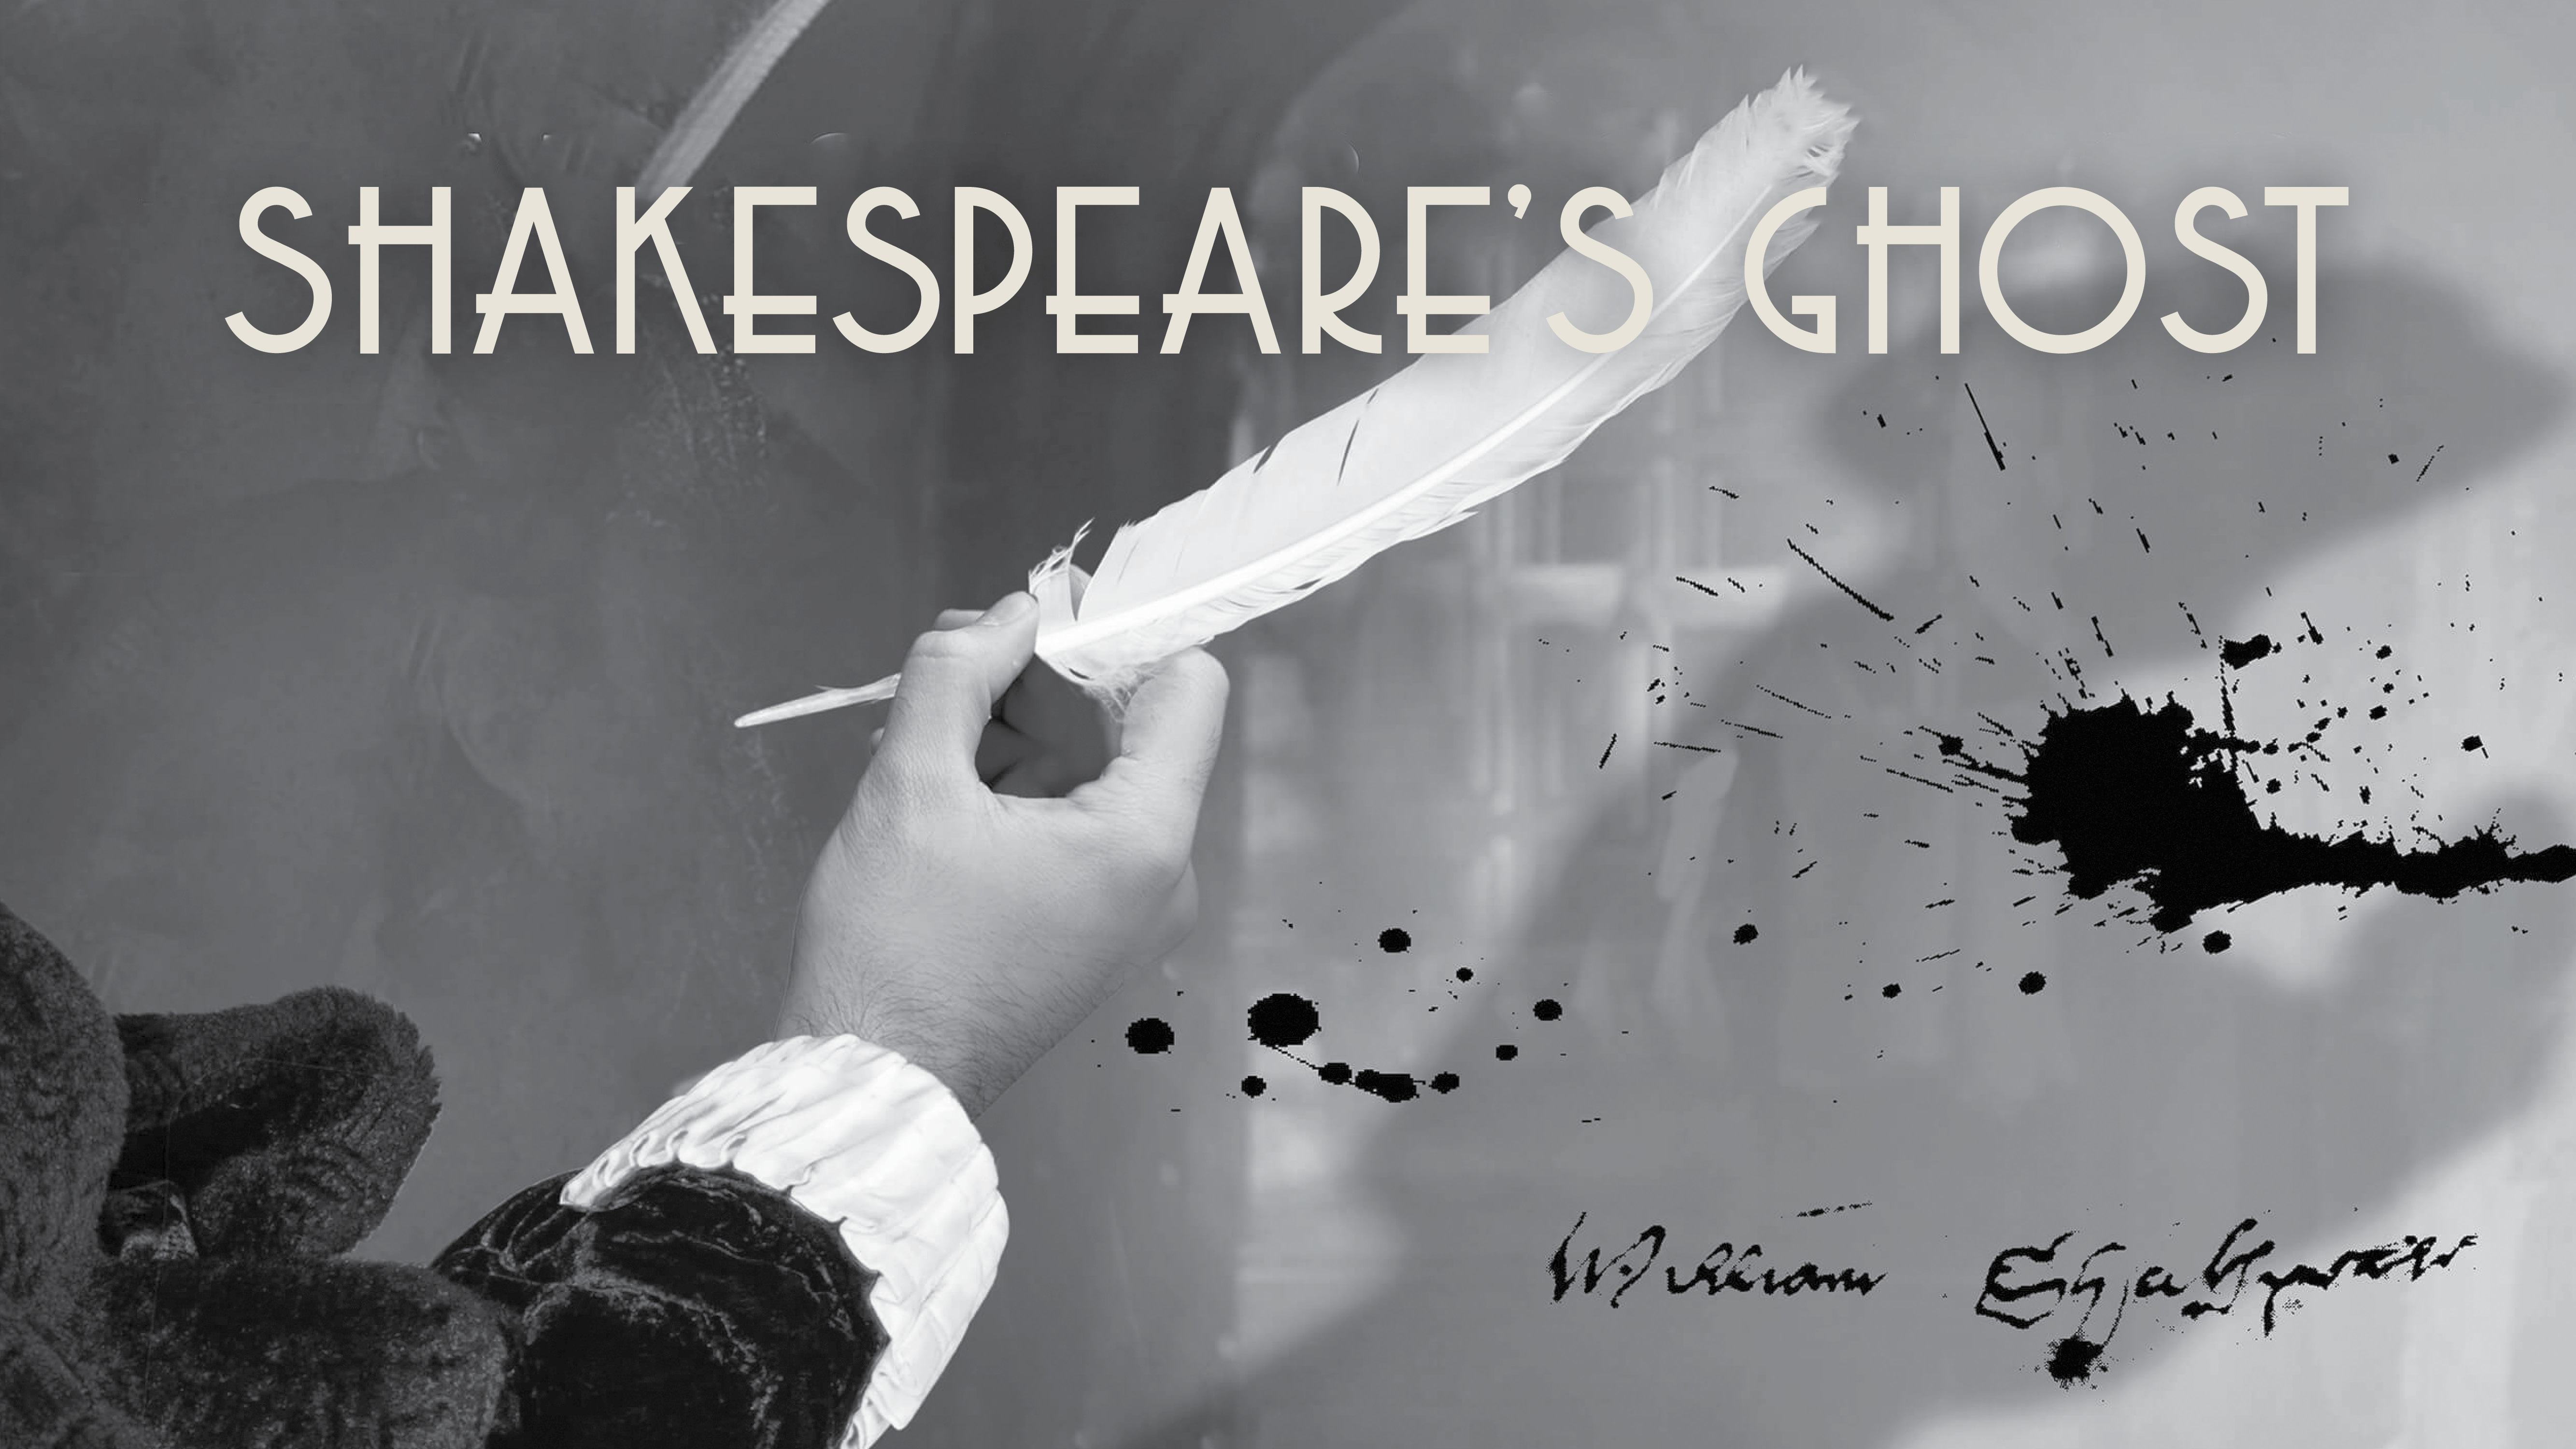 SHAKEPEARE'S GHOST by London Toast Theatre